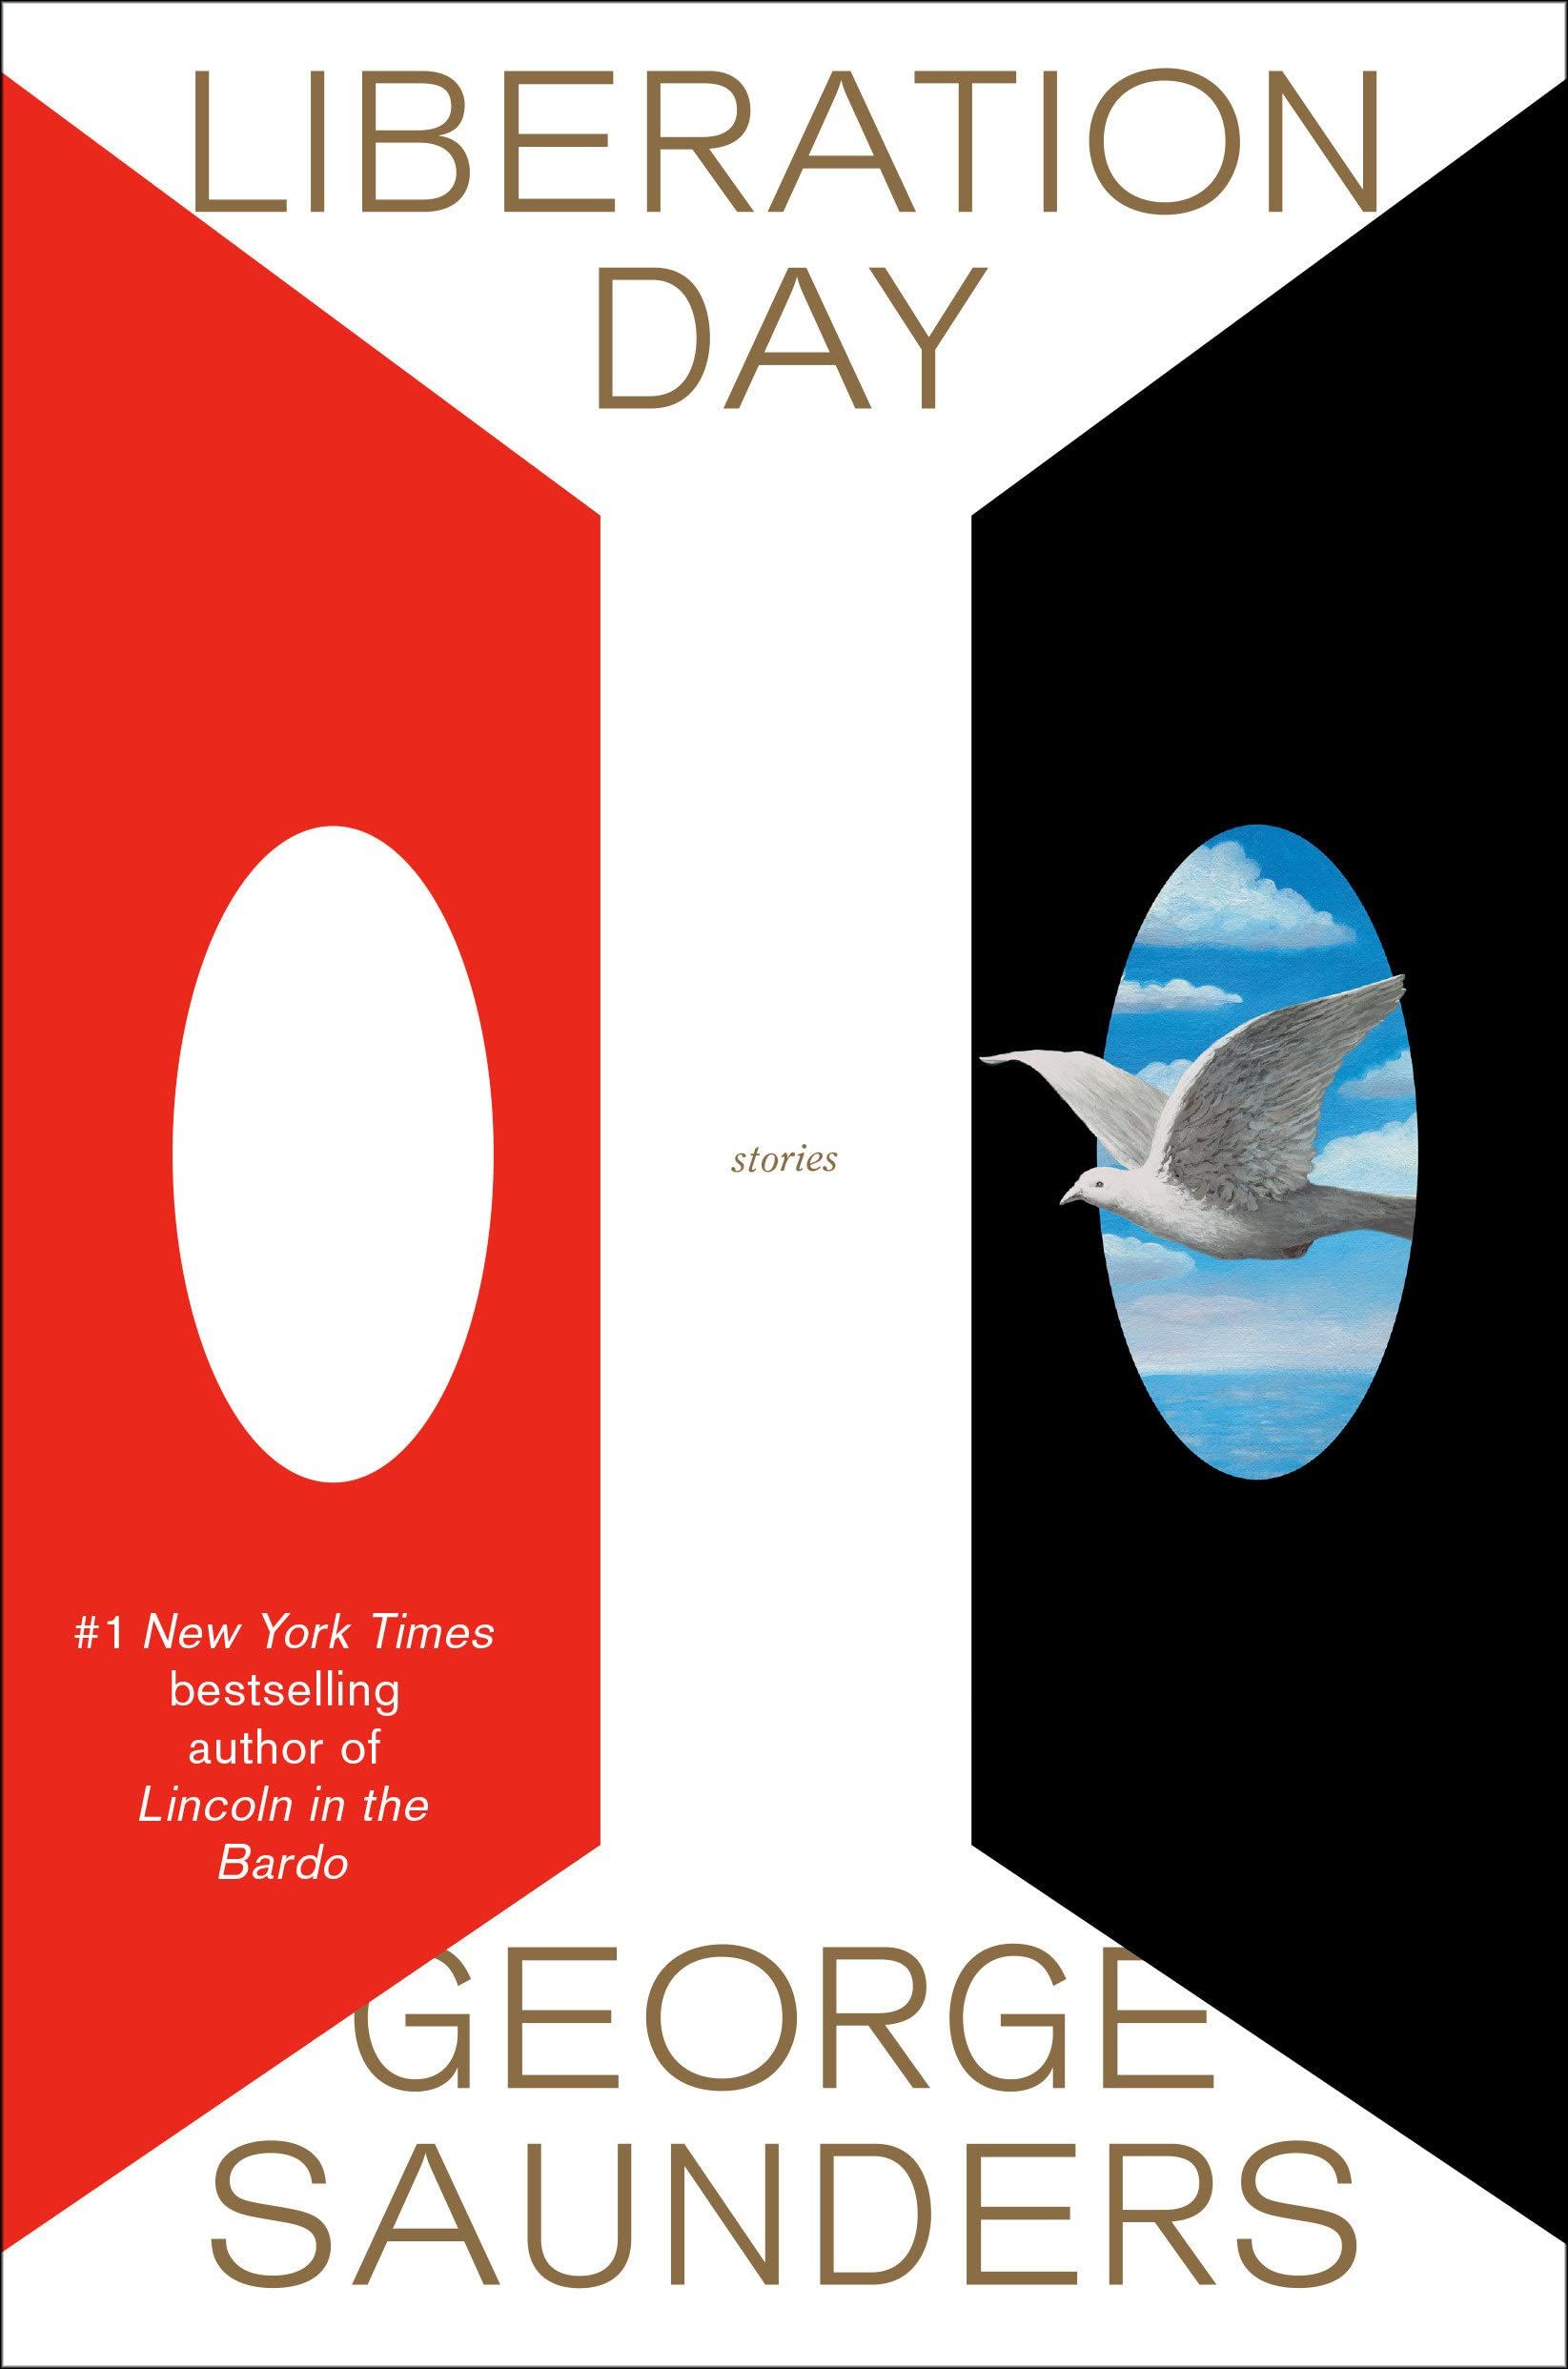 https://pyxis.nymag.com/v1/imgs/649/d9c/9ecde592456a4216aa6dc9343f075bf85d-Liberation-Day-by-George-Saunders.jpg